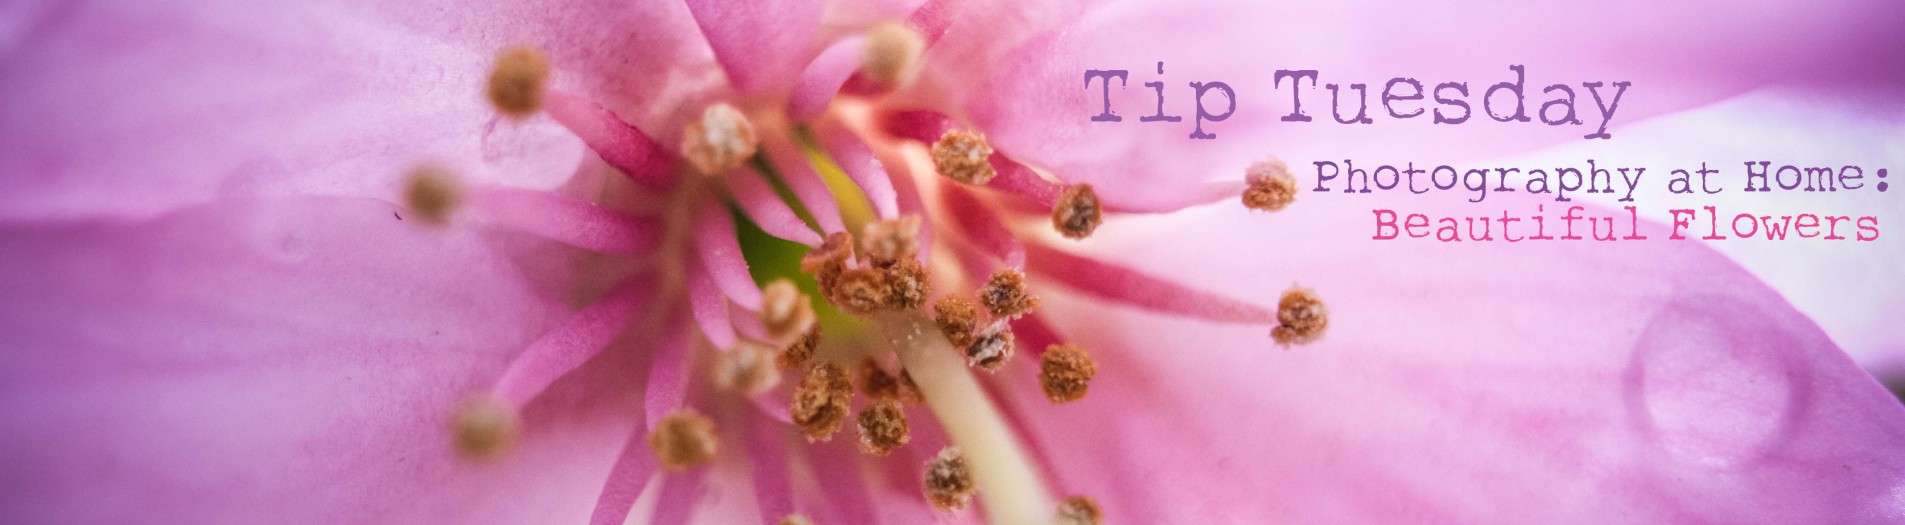 Tip Tuesday - Photography at Home: Beautiful Flowers